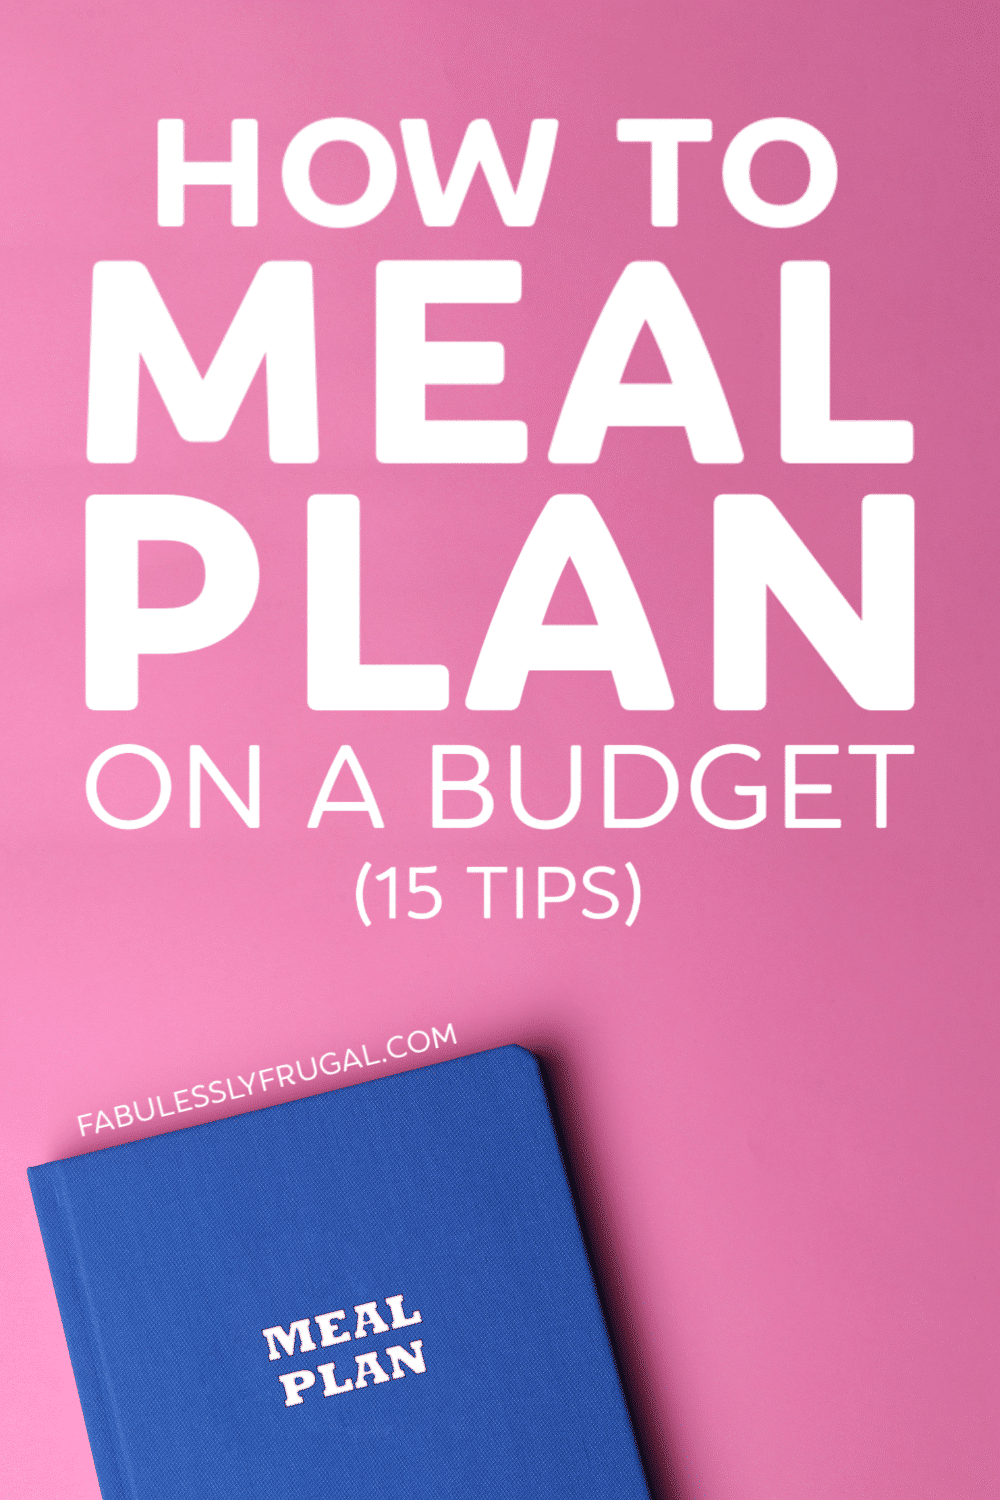 How to meal plan on a budget